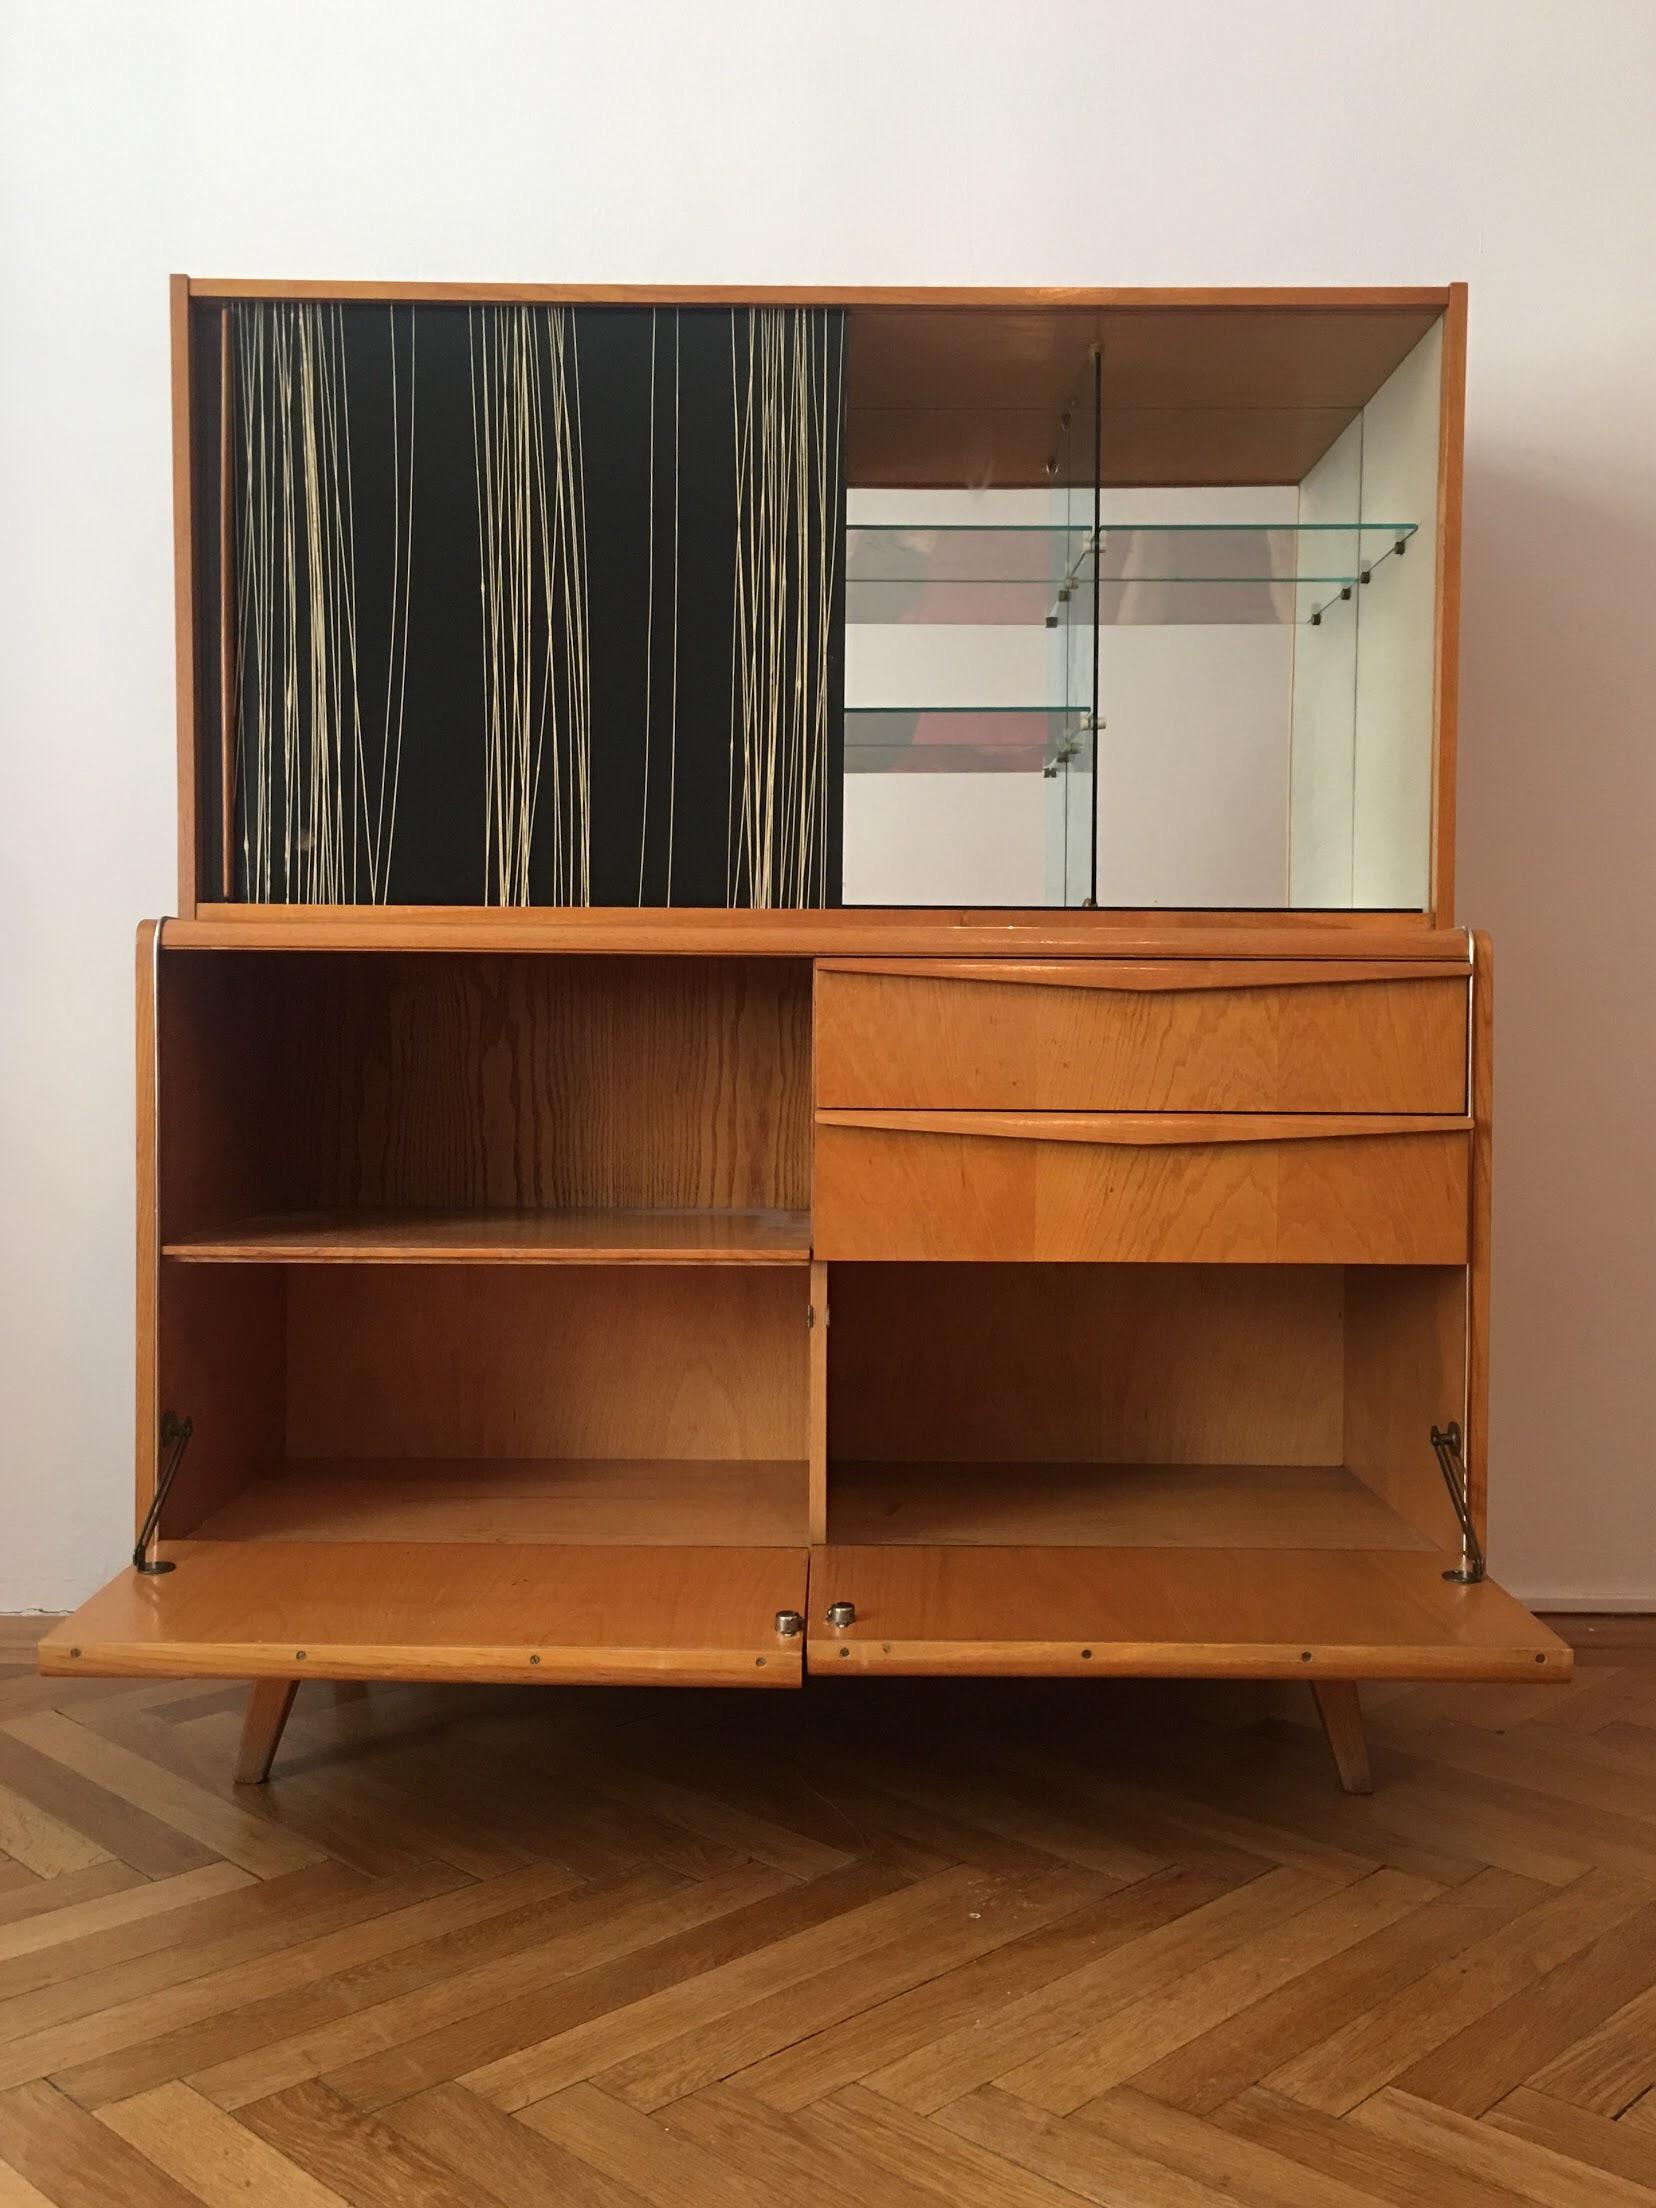 Czech Wooden Sideboard with Bar from Jitona, 1960s For Sale